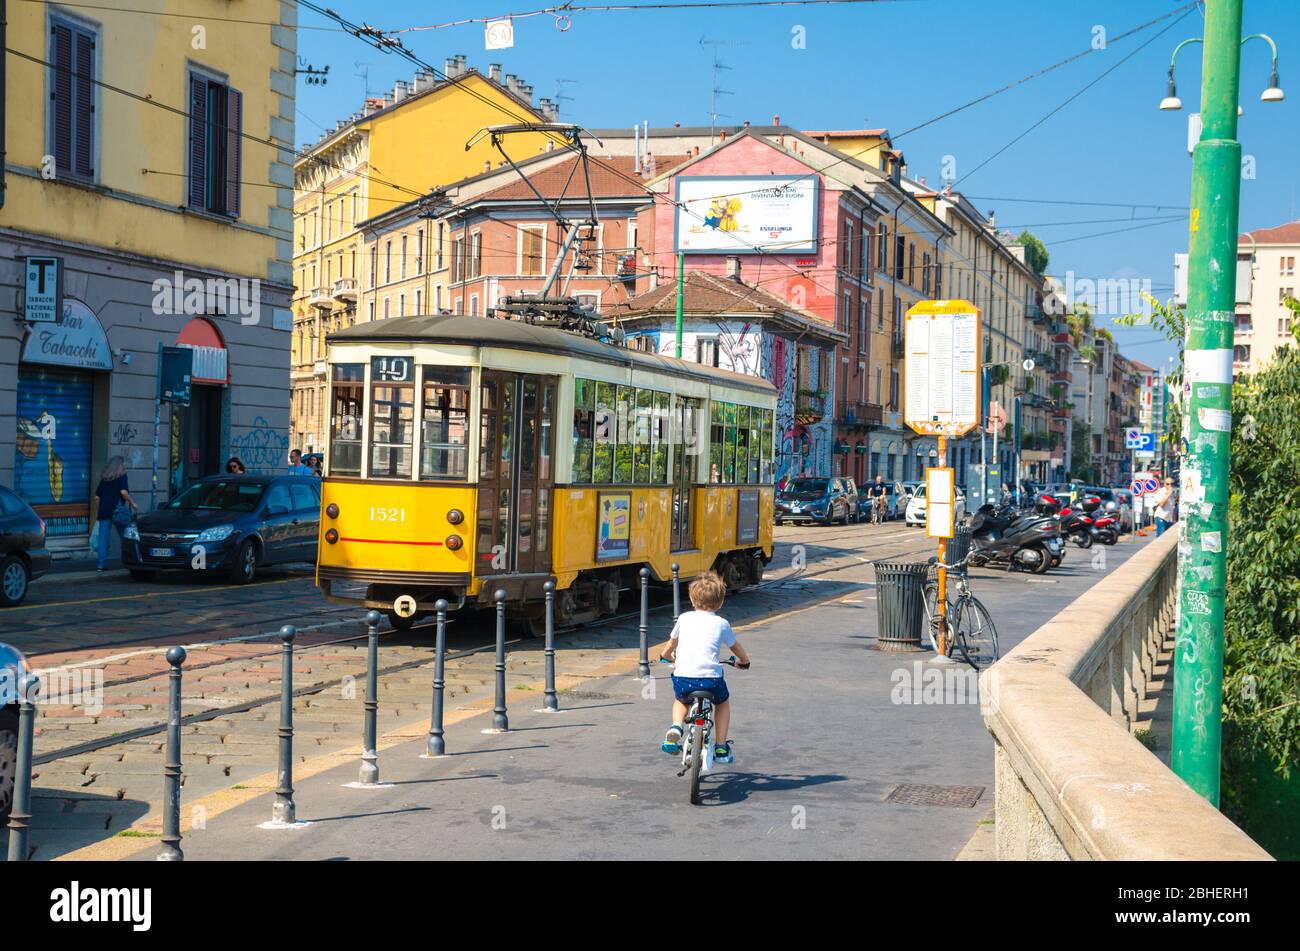 Milan, Italy, September 9, 2018: young boy is riding a bicycle bike near old yellow traditional tram on street with colorful multicolored buildings in beautiful summer day Stock Photo